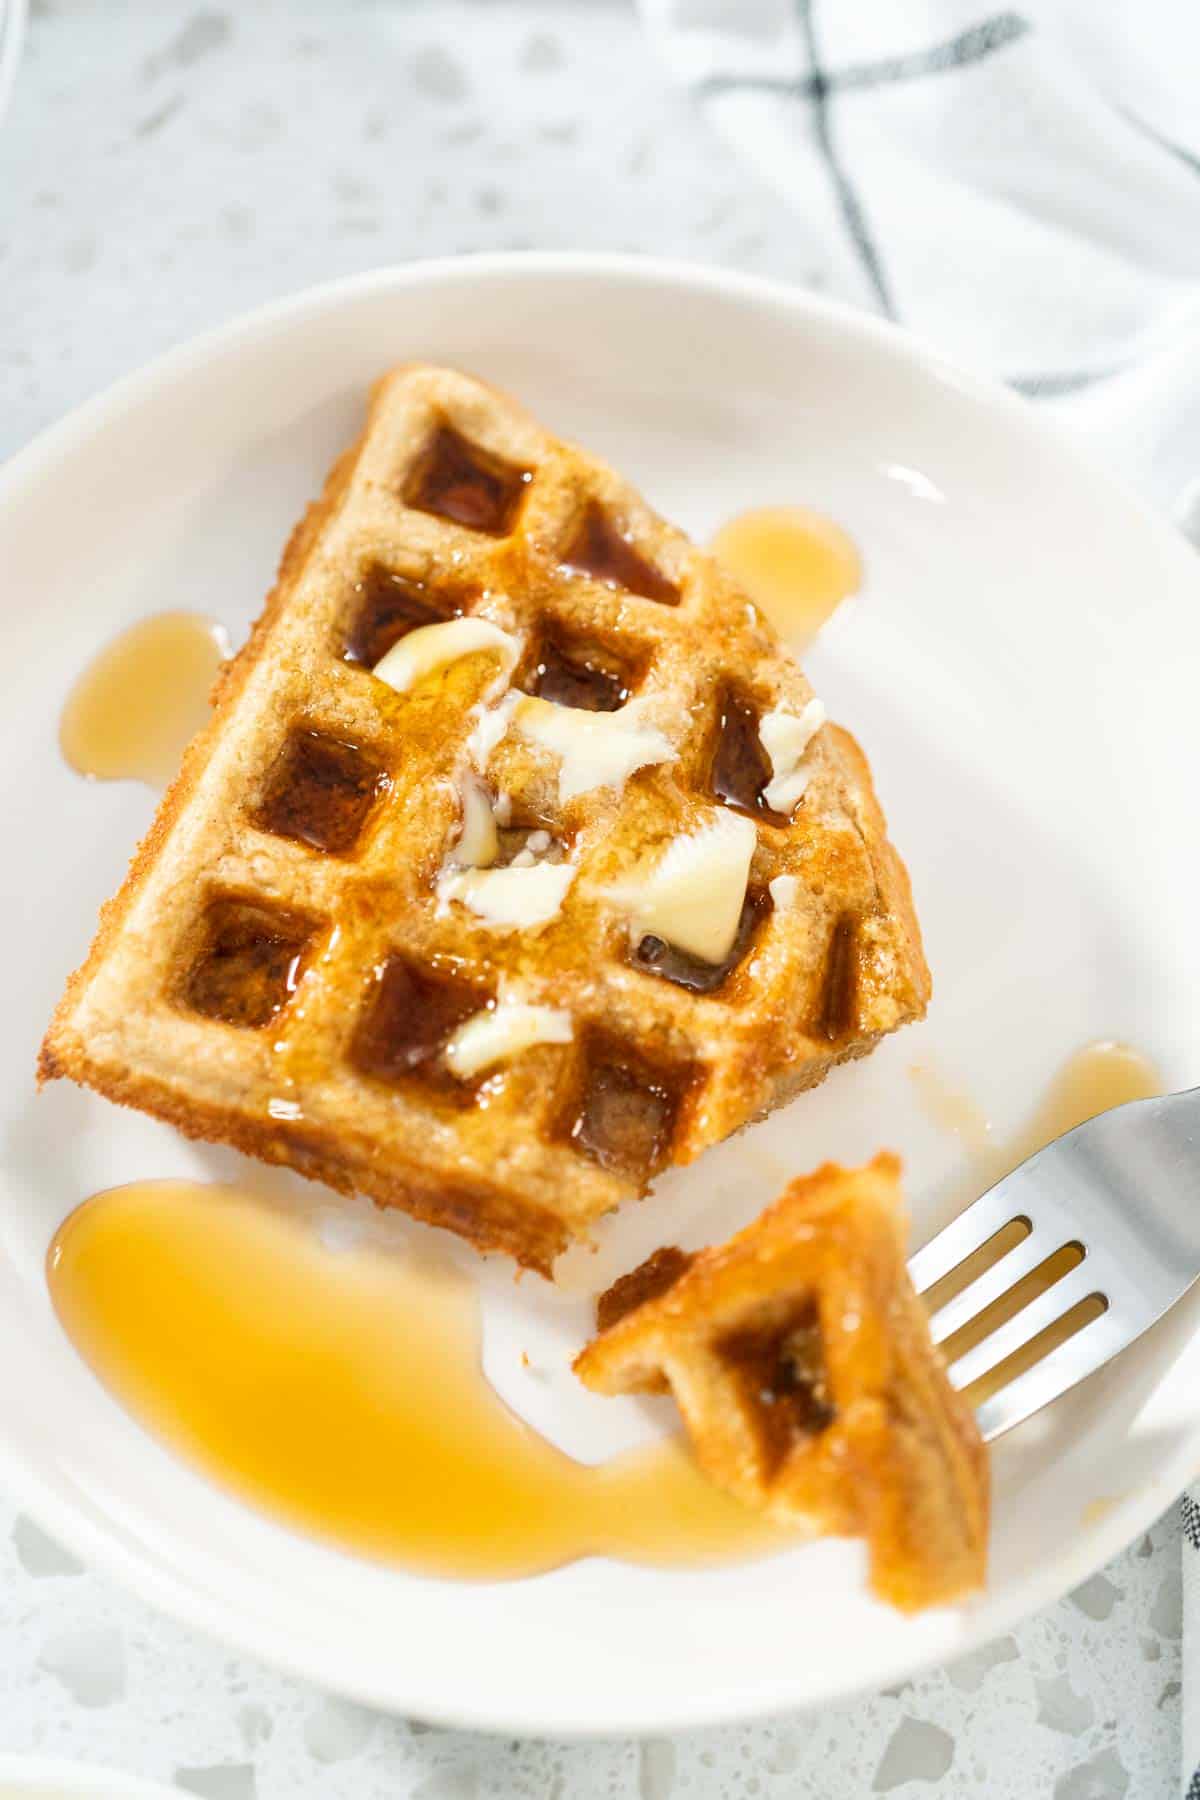 A small oat flour waffle with butter, drizzled with syrup.